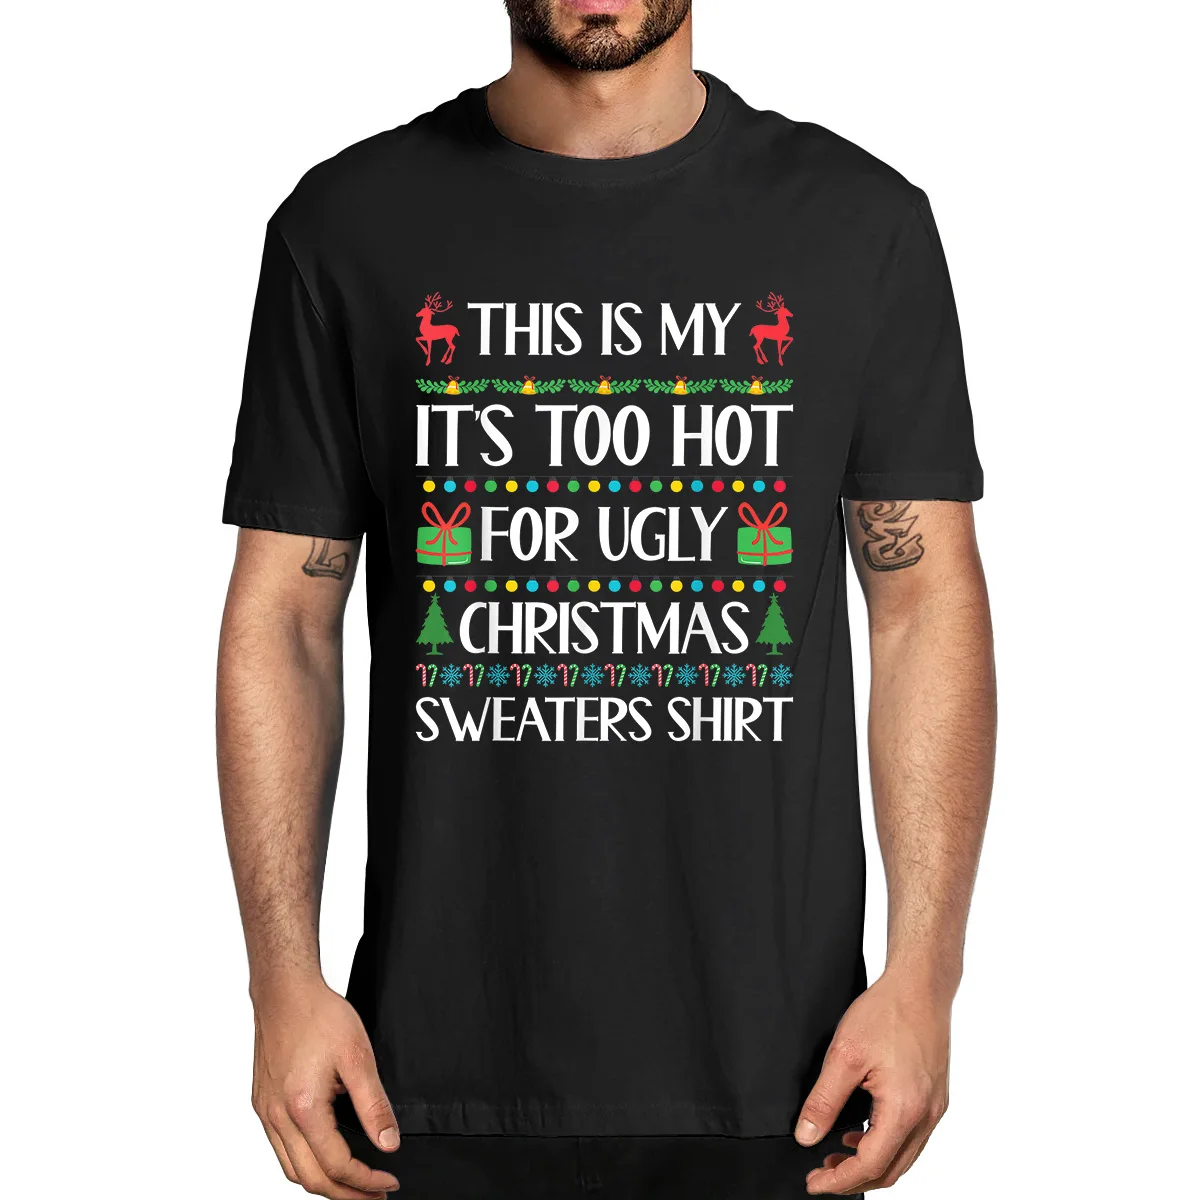 

Unisex 100% Cotton This Is My It's Too Hot For Ugly Christmas Sweaters Shirt Xmas Men T-Shirt Gift Casual Clothing Tee